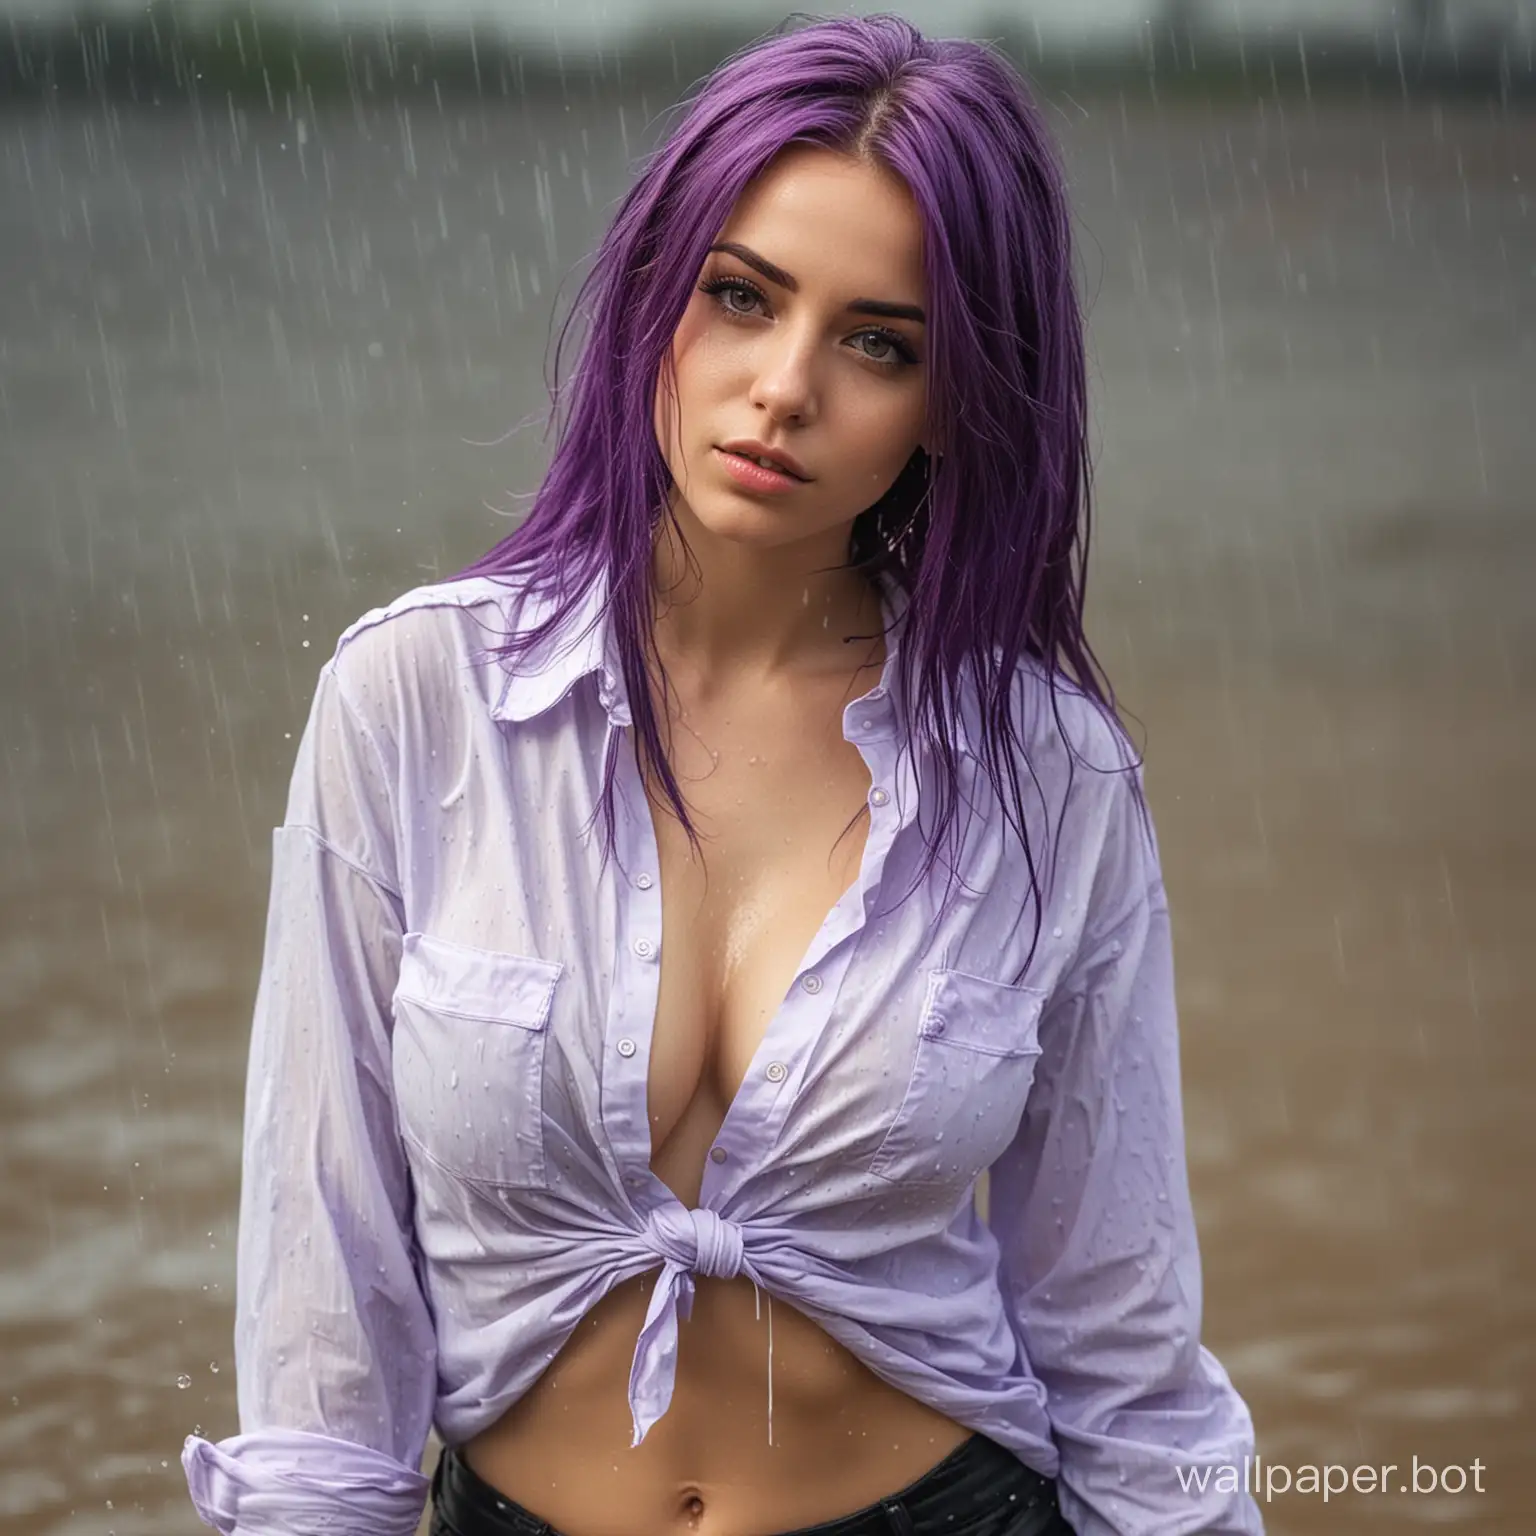 Vibrant-PurpleHaired-Girl-in-Soaked-Shirt